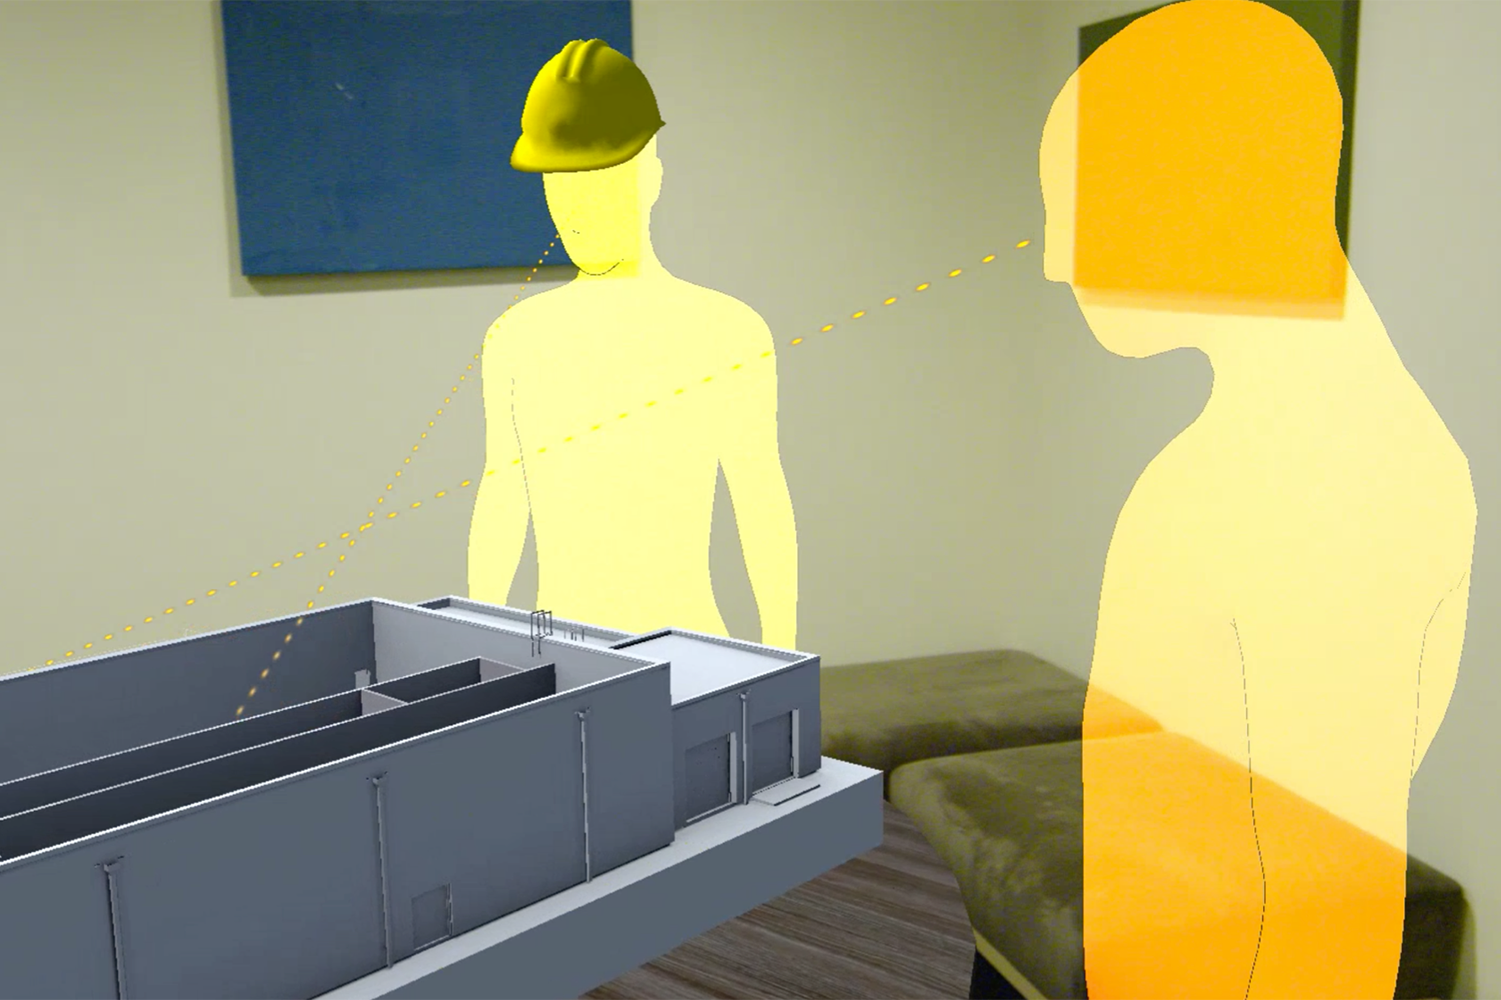 hololens mixed reality work tool object theory building mode